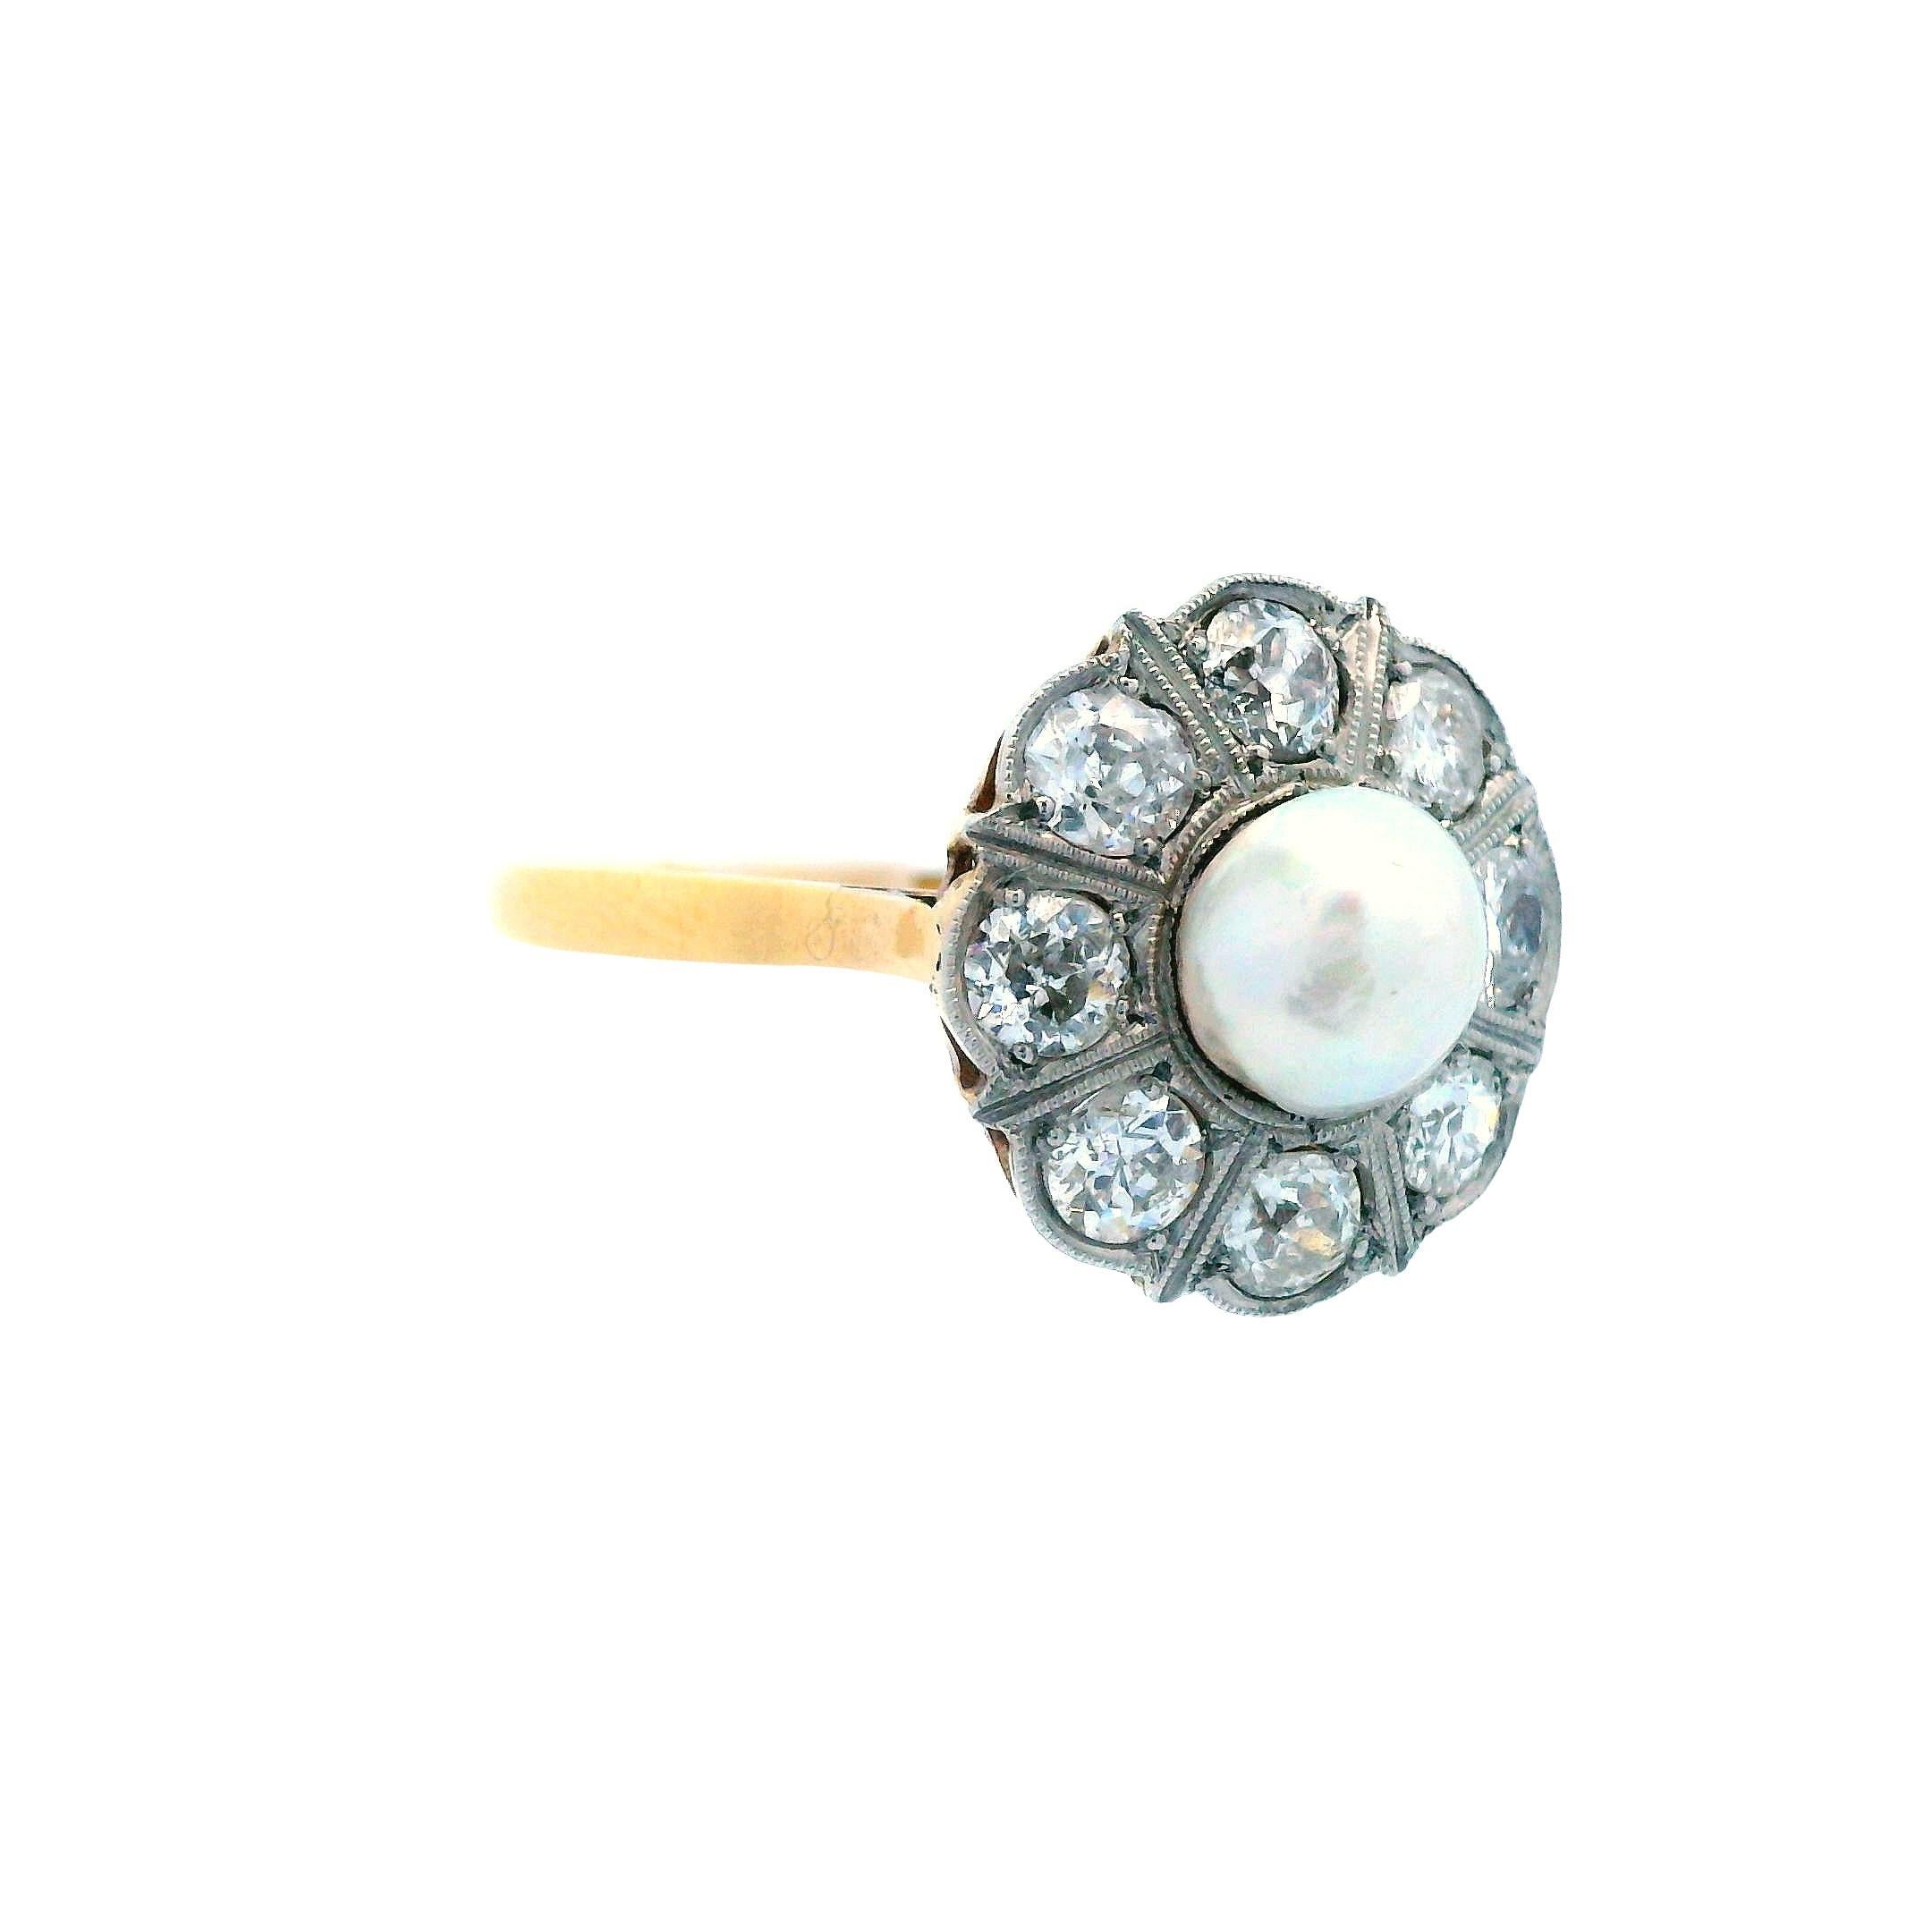 1910 Edwardian 18K Yellow Gold ov Platinum Natural Pearl & Diamond Ring For Sale 3